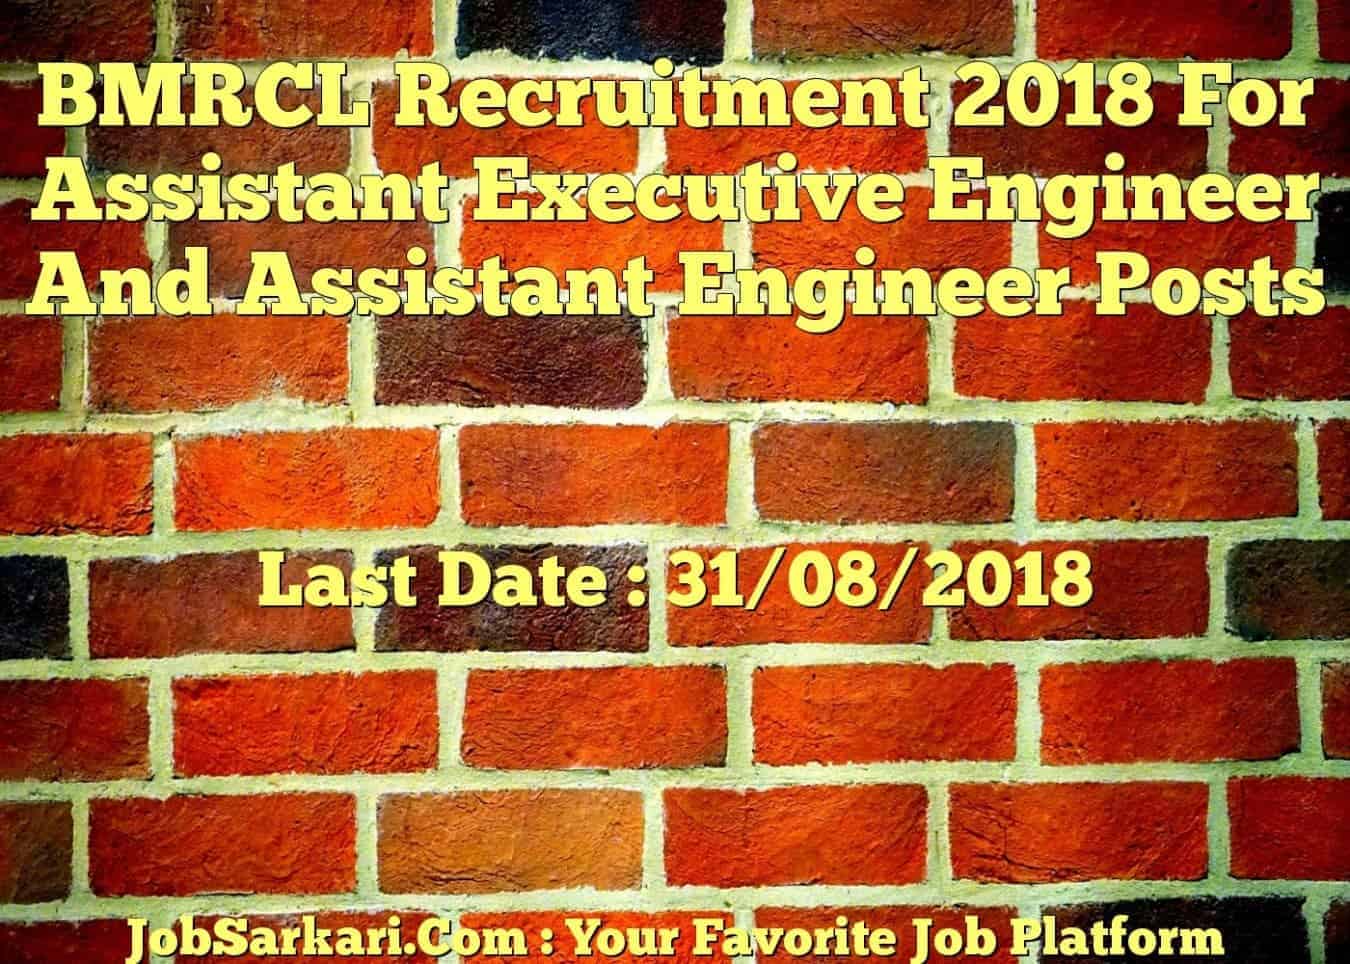 BMRCL Recruitment 2018 For Assistant Executive Engineer And Assistant Engineer Posts